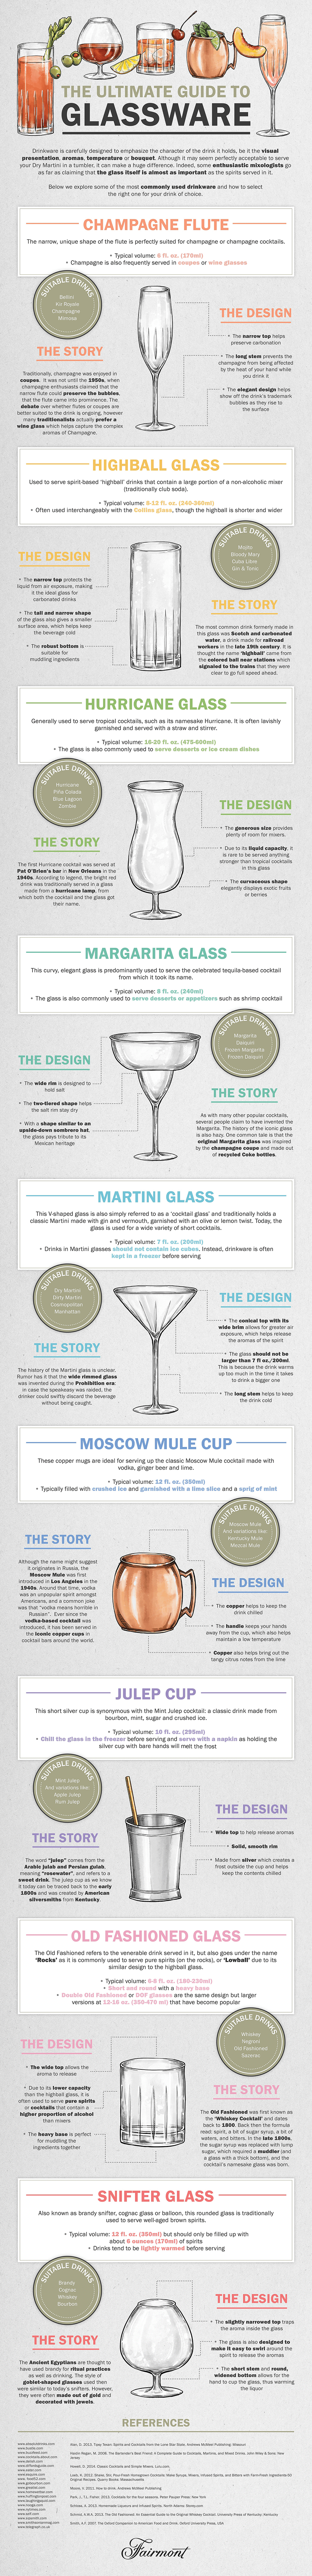 From champagne flutes to Martini glasses, here is everything you need to know about the most common cocktail glasses.